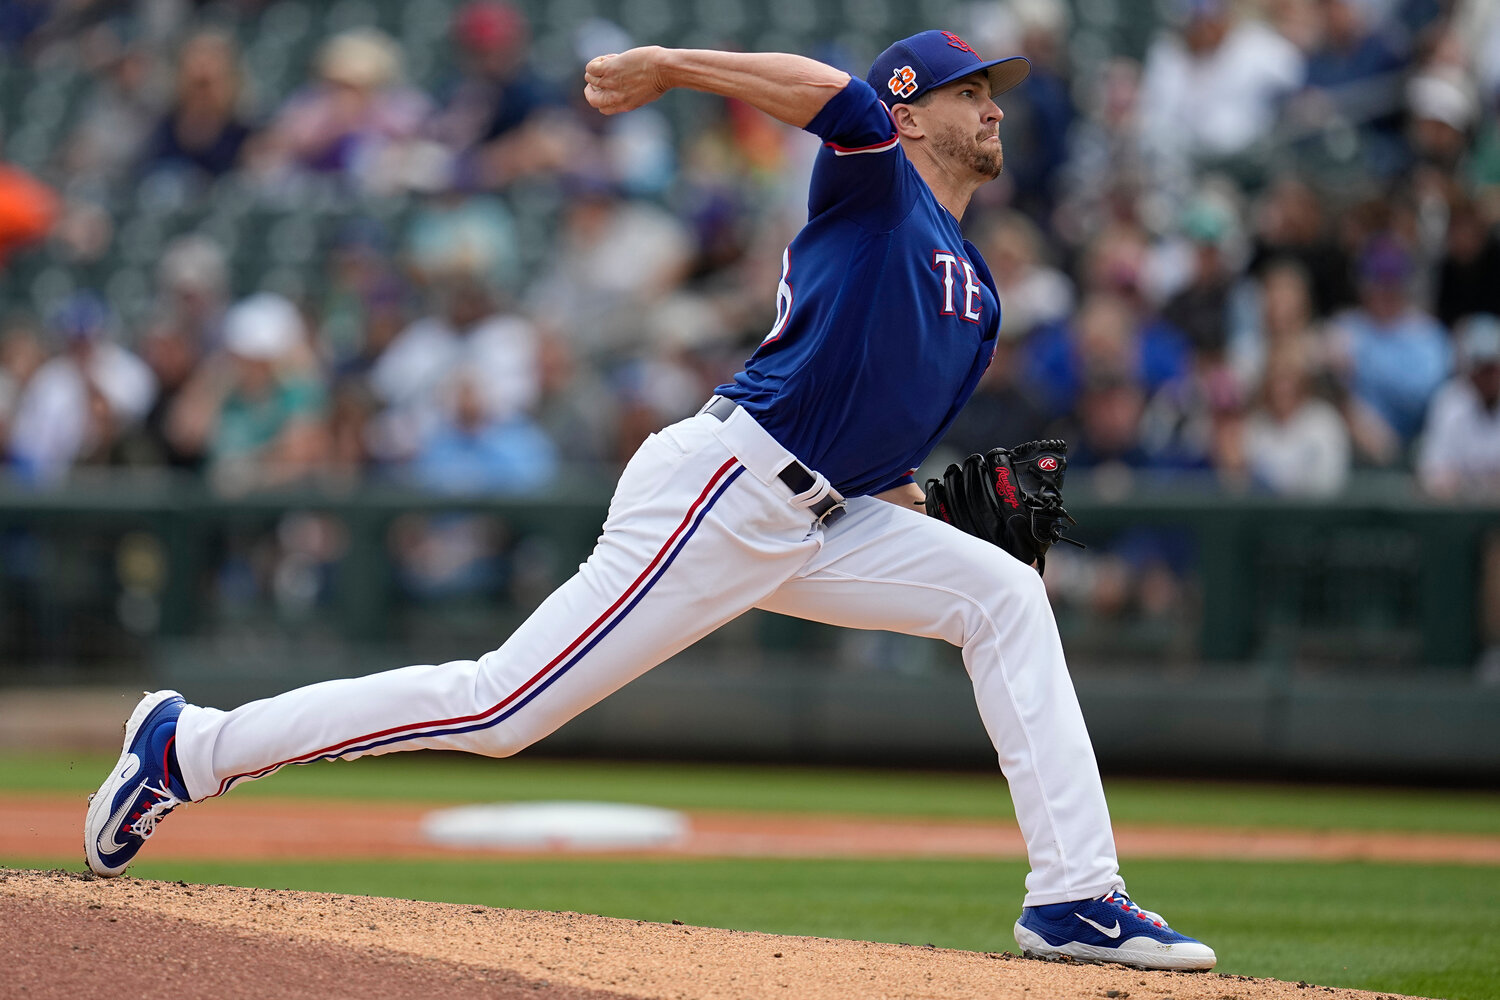 Texas Rangers starting pitcher Jacob deGrom delivers a pitch against the Seattle Mariners, on Sunday in Surprise, Ariz. The ace-righthander, who signed a five-year, $185 million contract with the Rangers in the offseason, will face Philadelphia’s Aaron Nola when the 2023 Major League Baseball season opens on Thursday.